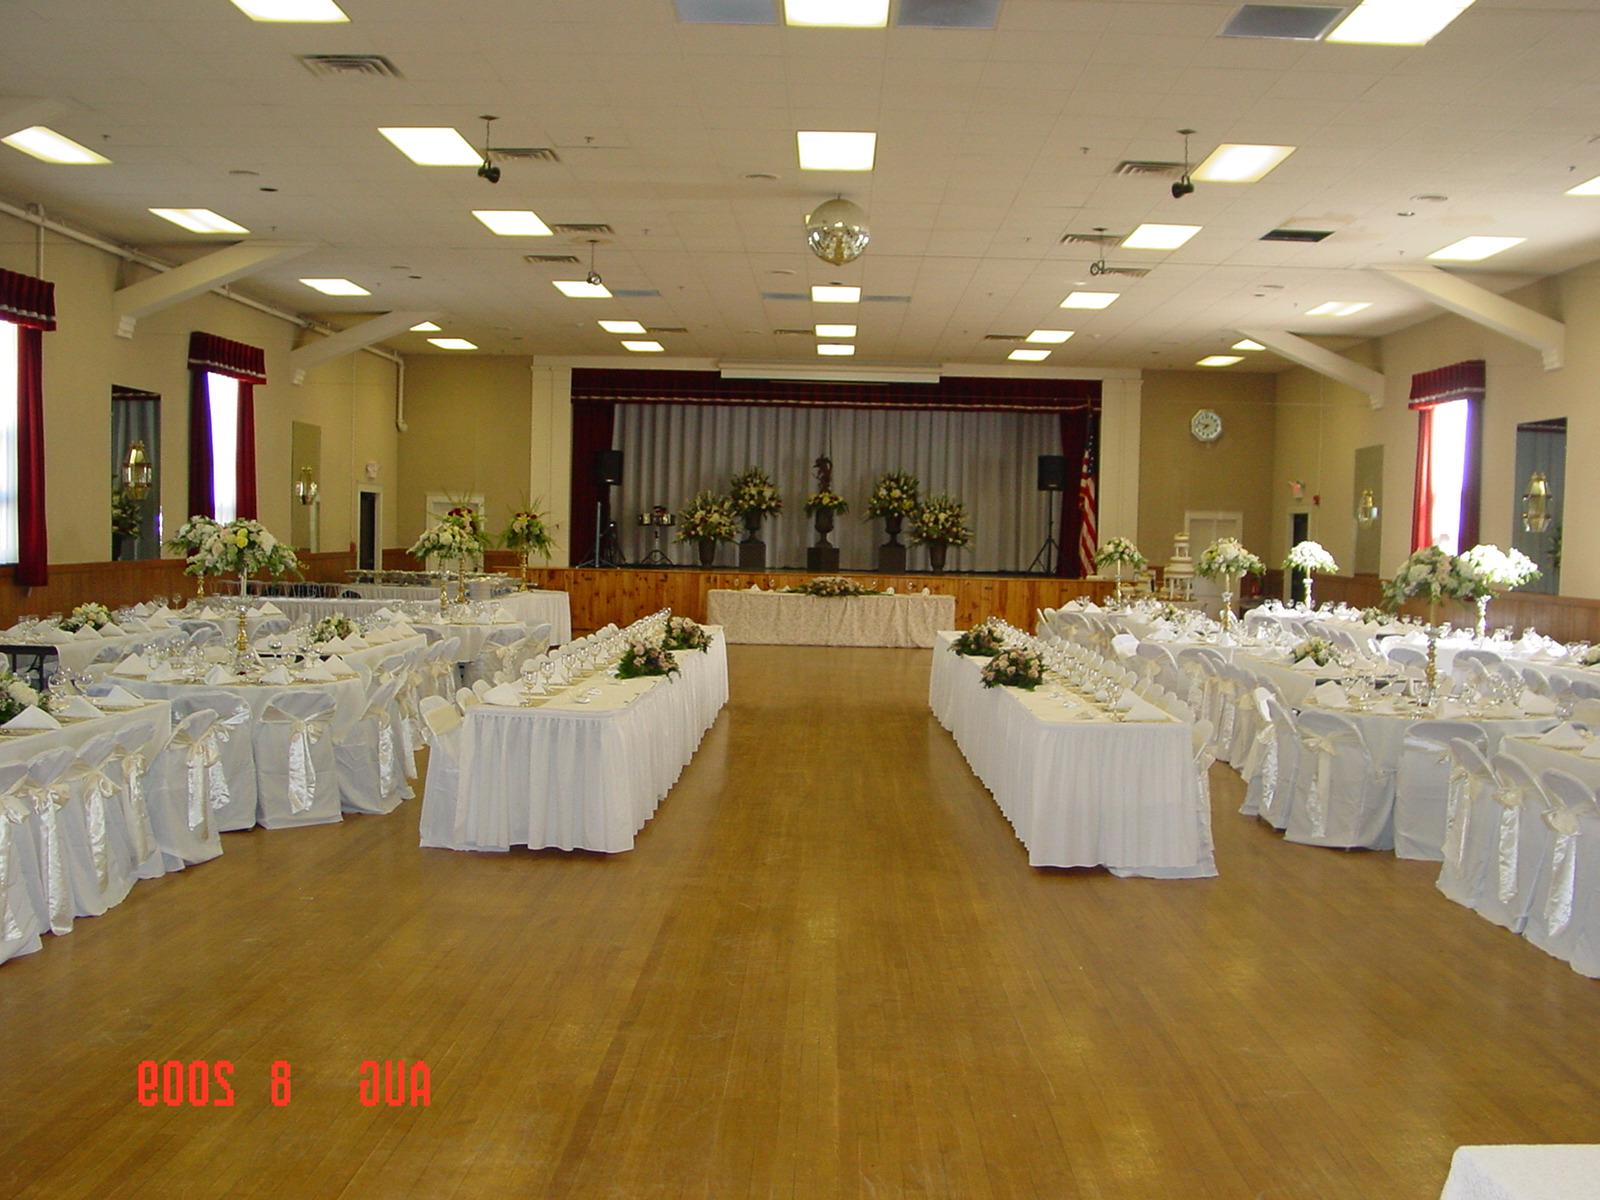 View of head table from center